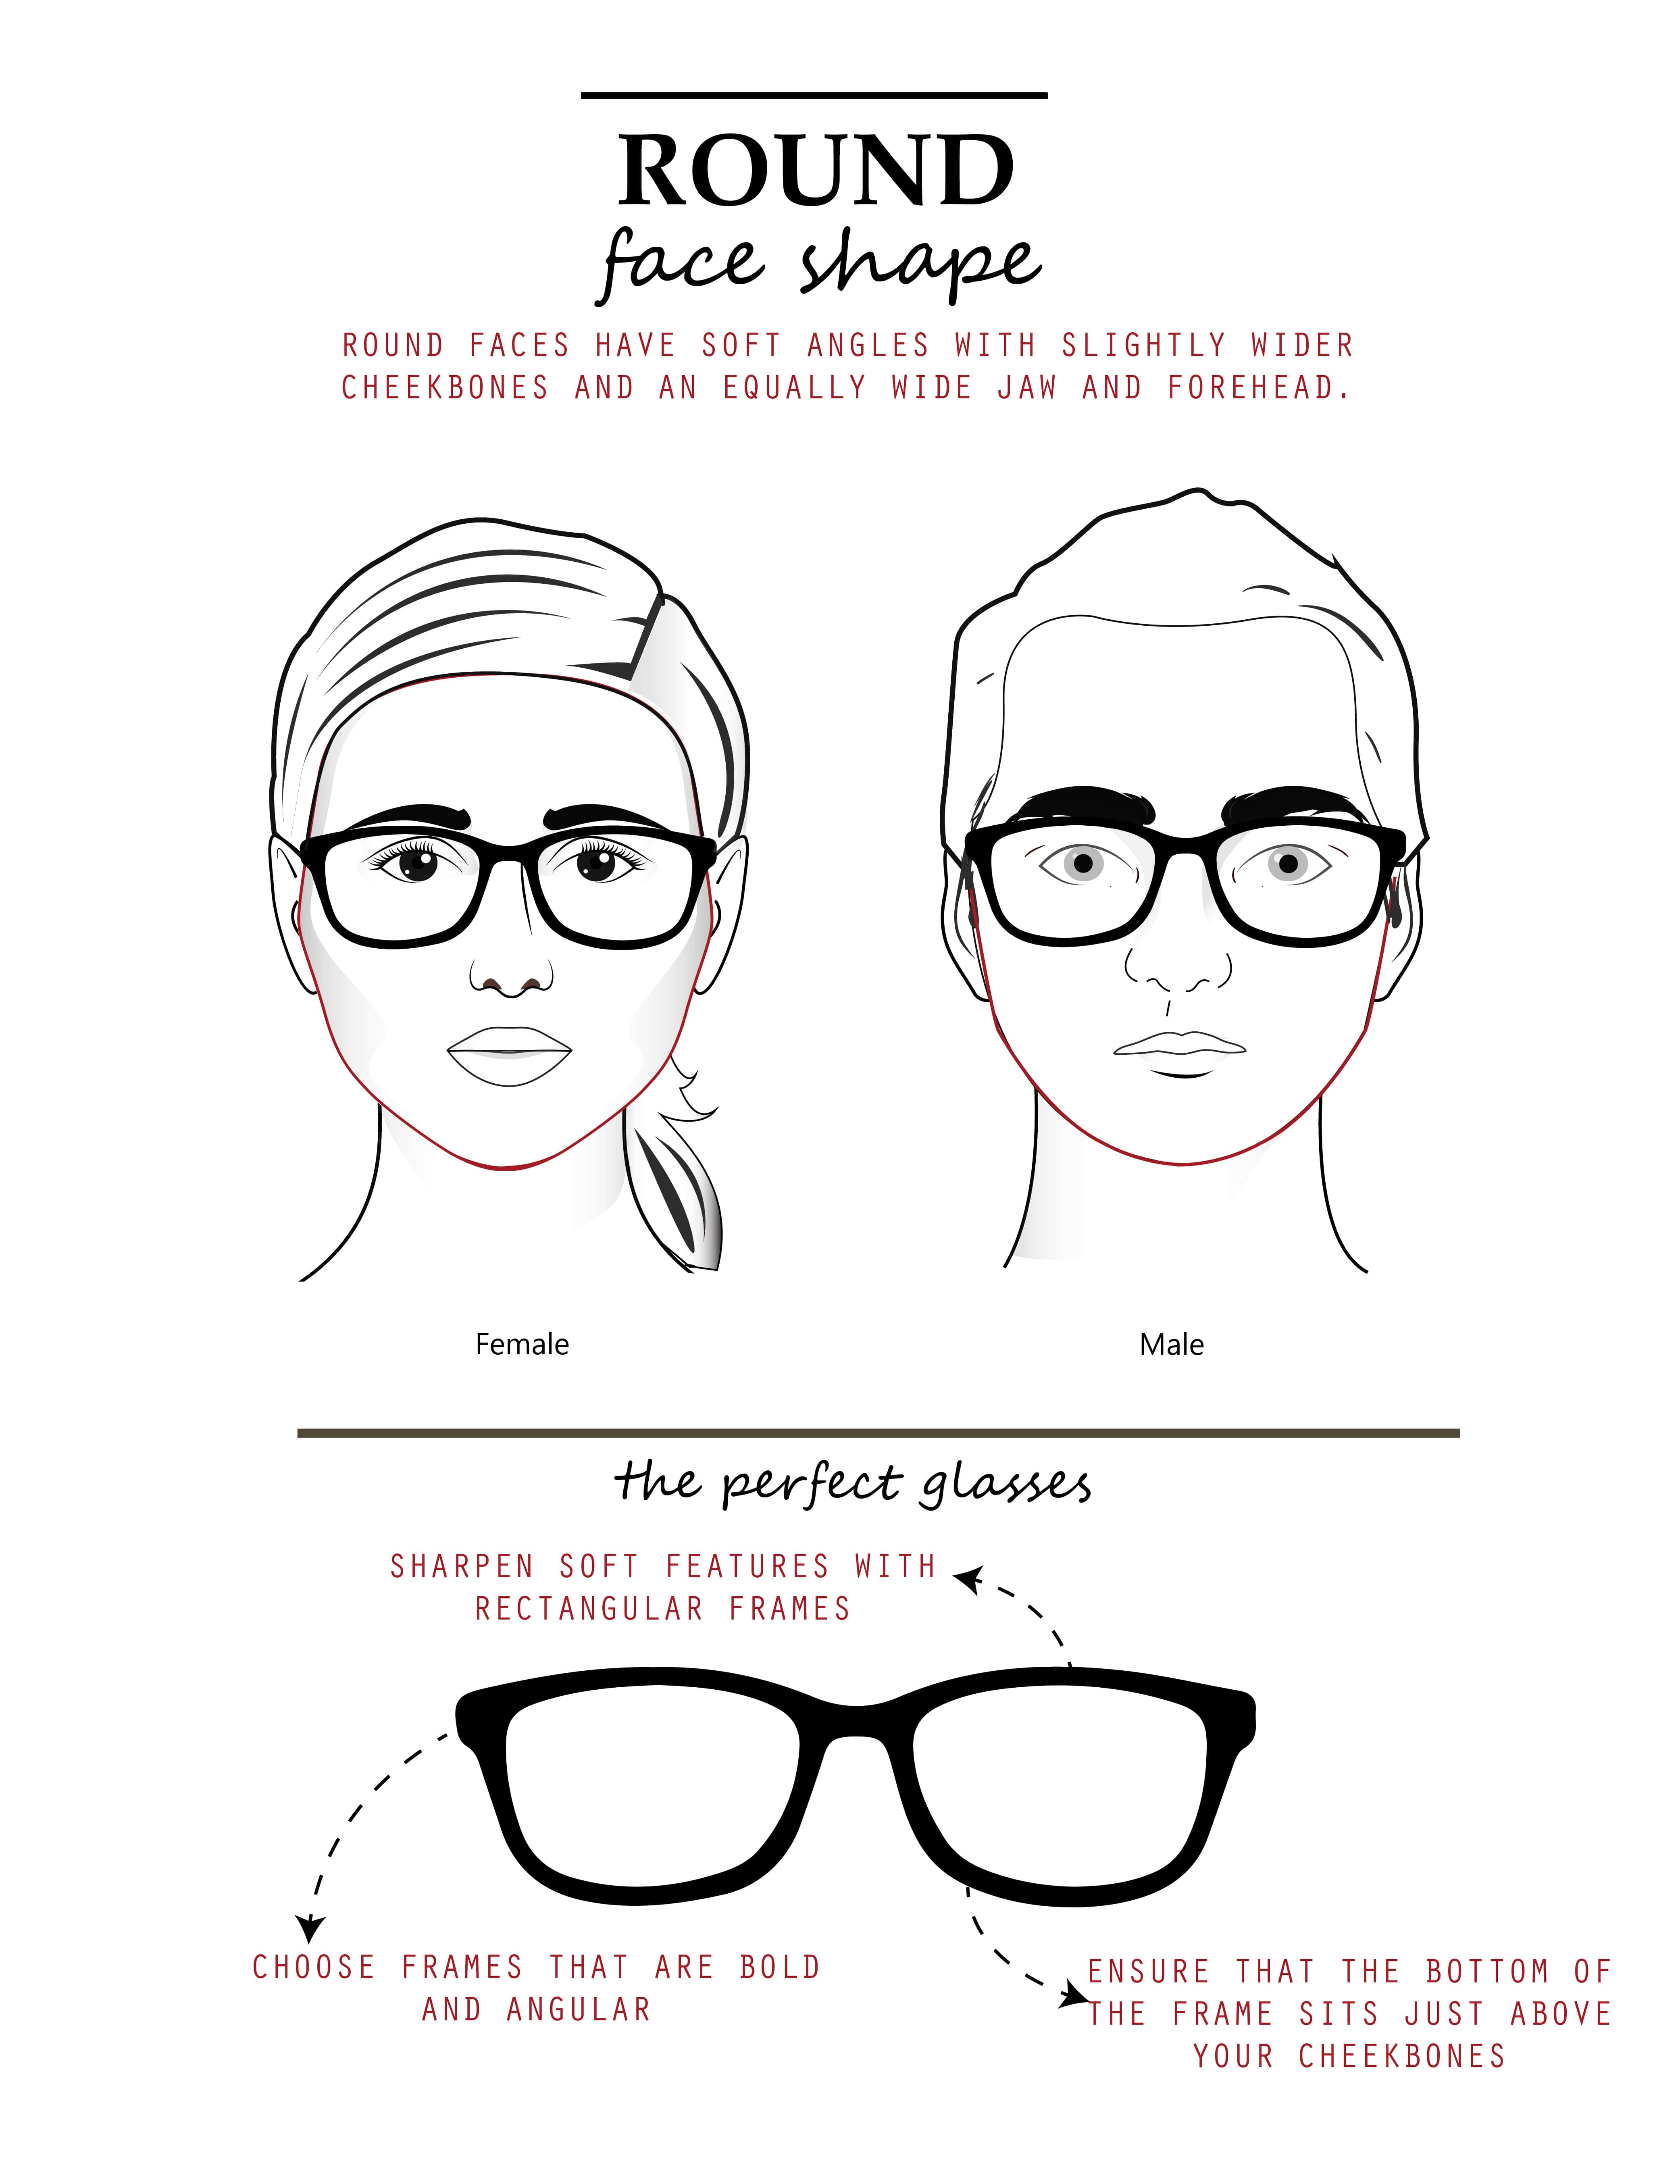 Face shape and frame selection